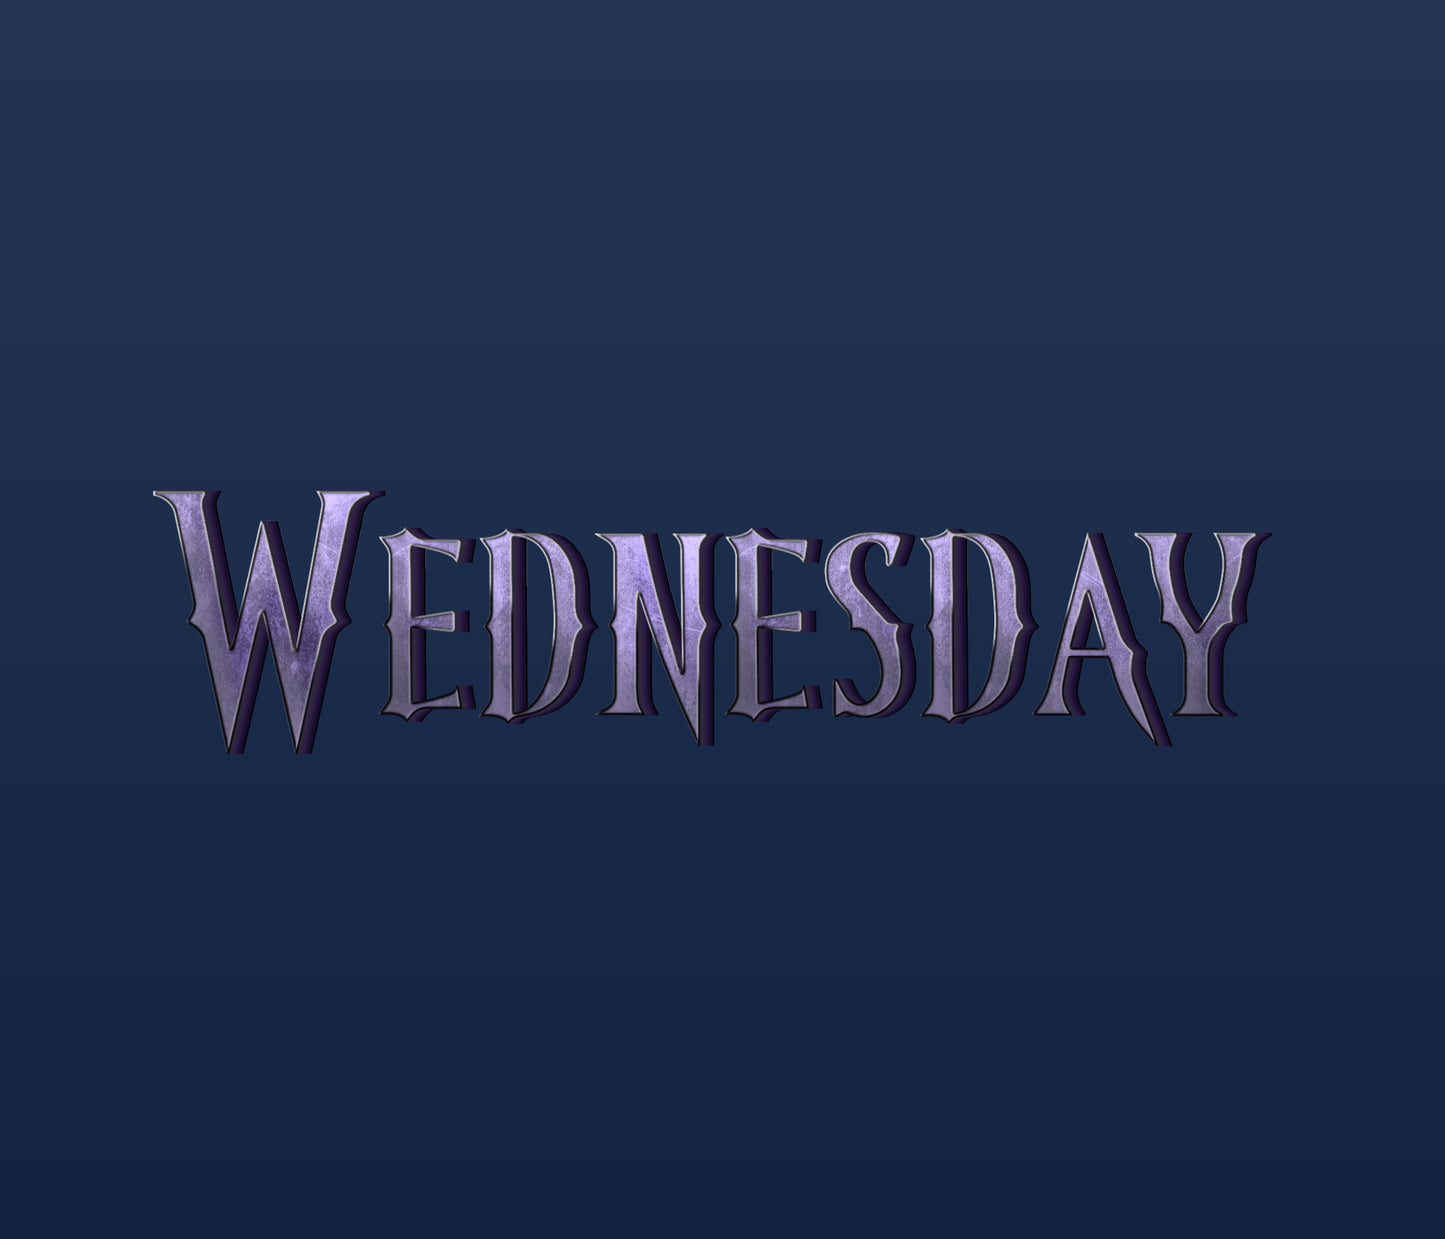 Wednesday’s Dance Font: A Gothic Digital Font Inspired by the Addams Family’s Wednesday Addams